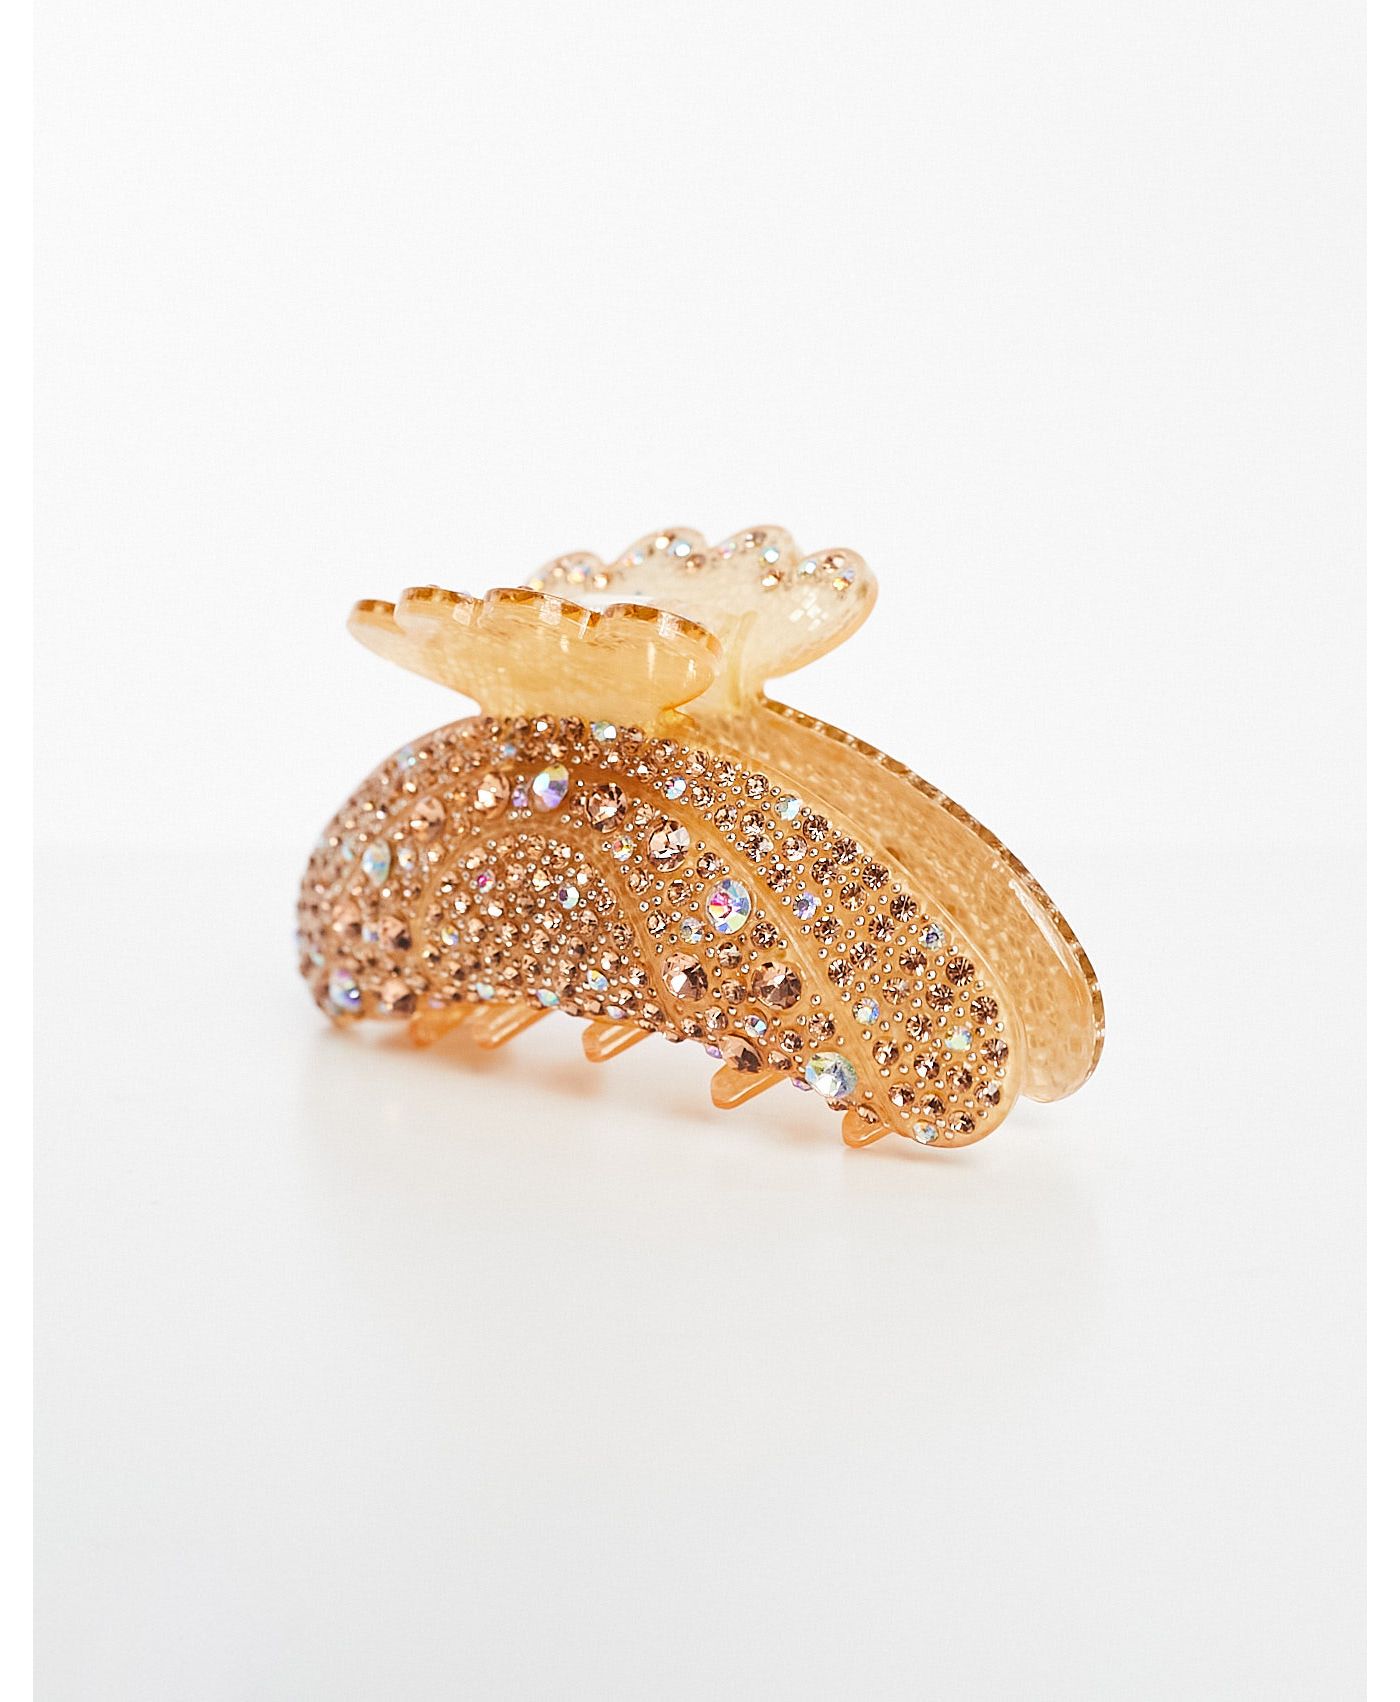 SUI AVA helen reflects hair claw clip in gold embellished